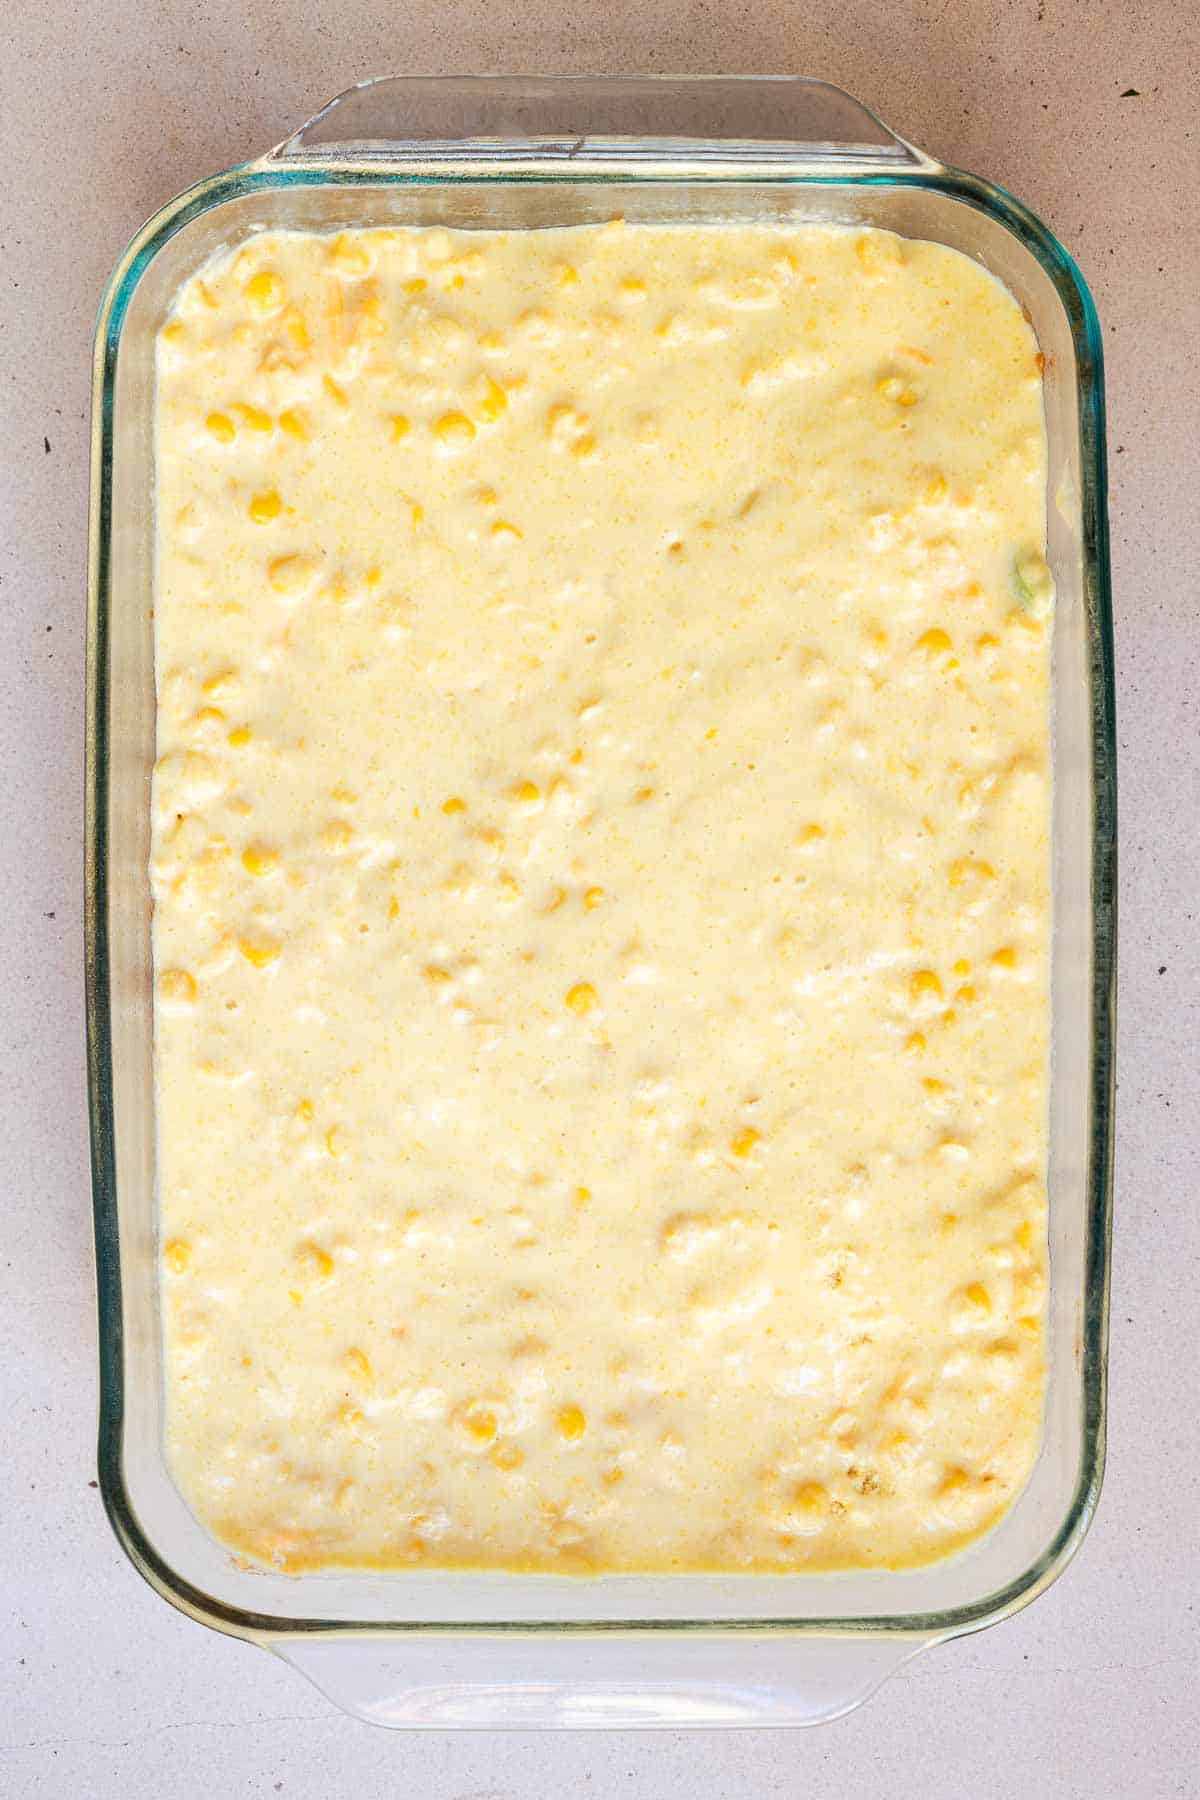 The cornbread mixture is pour in an even layer over top of the chili.